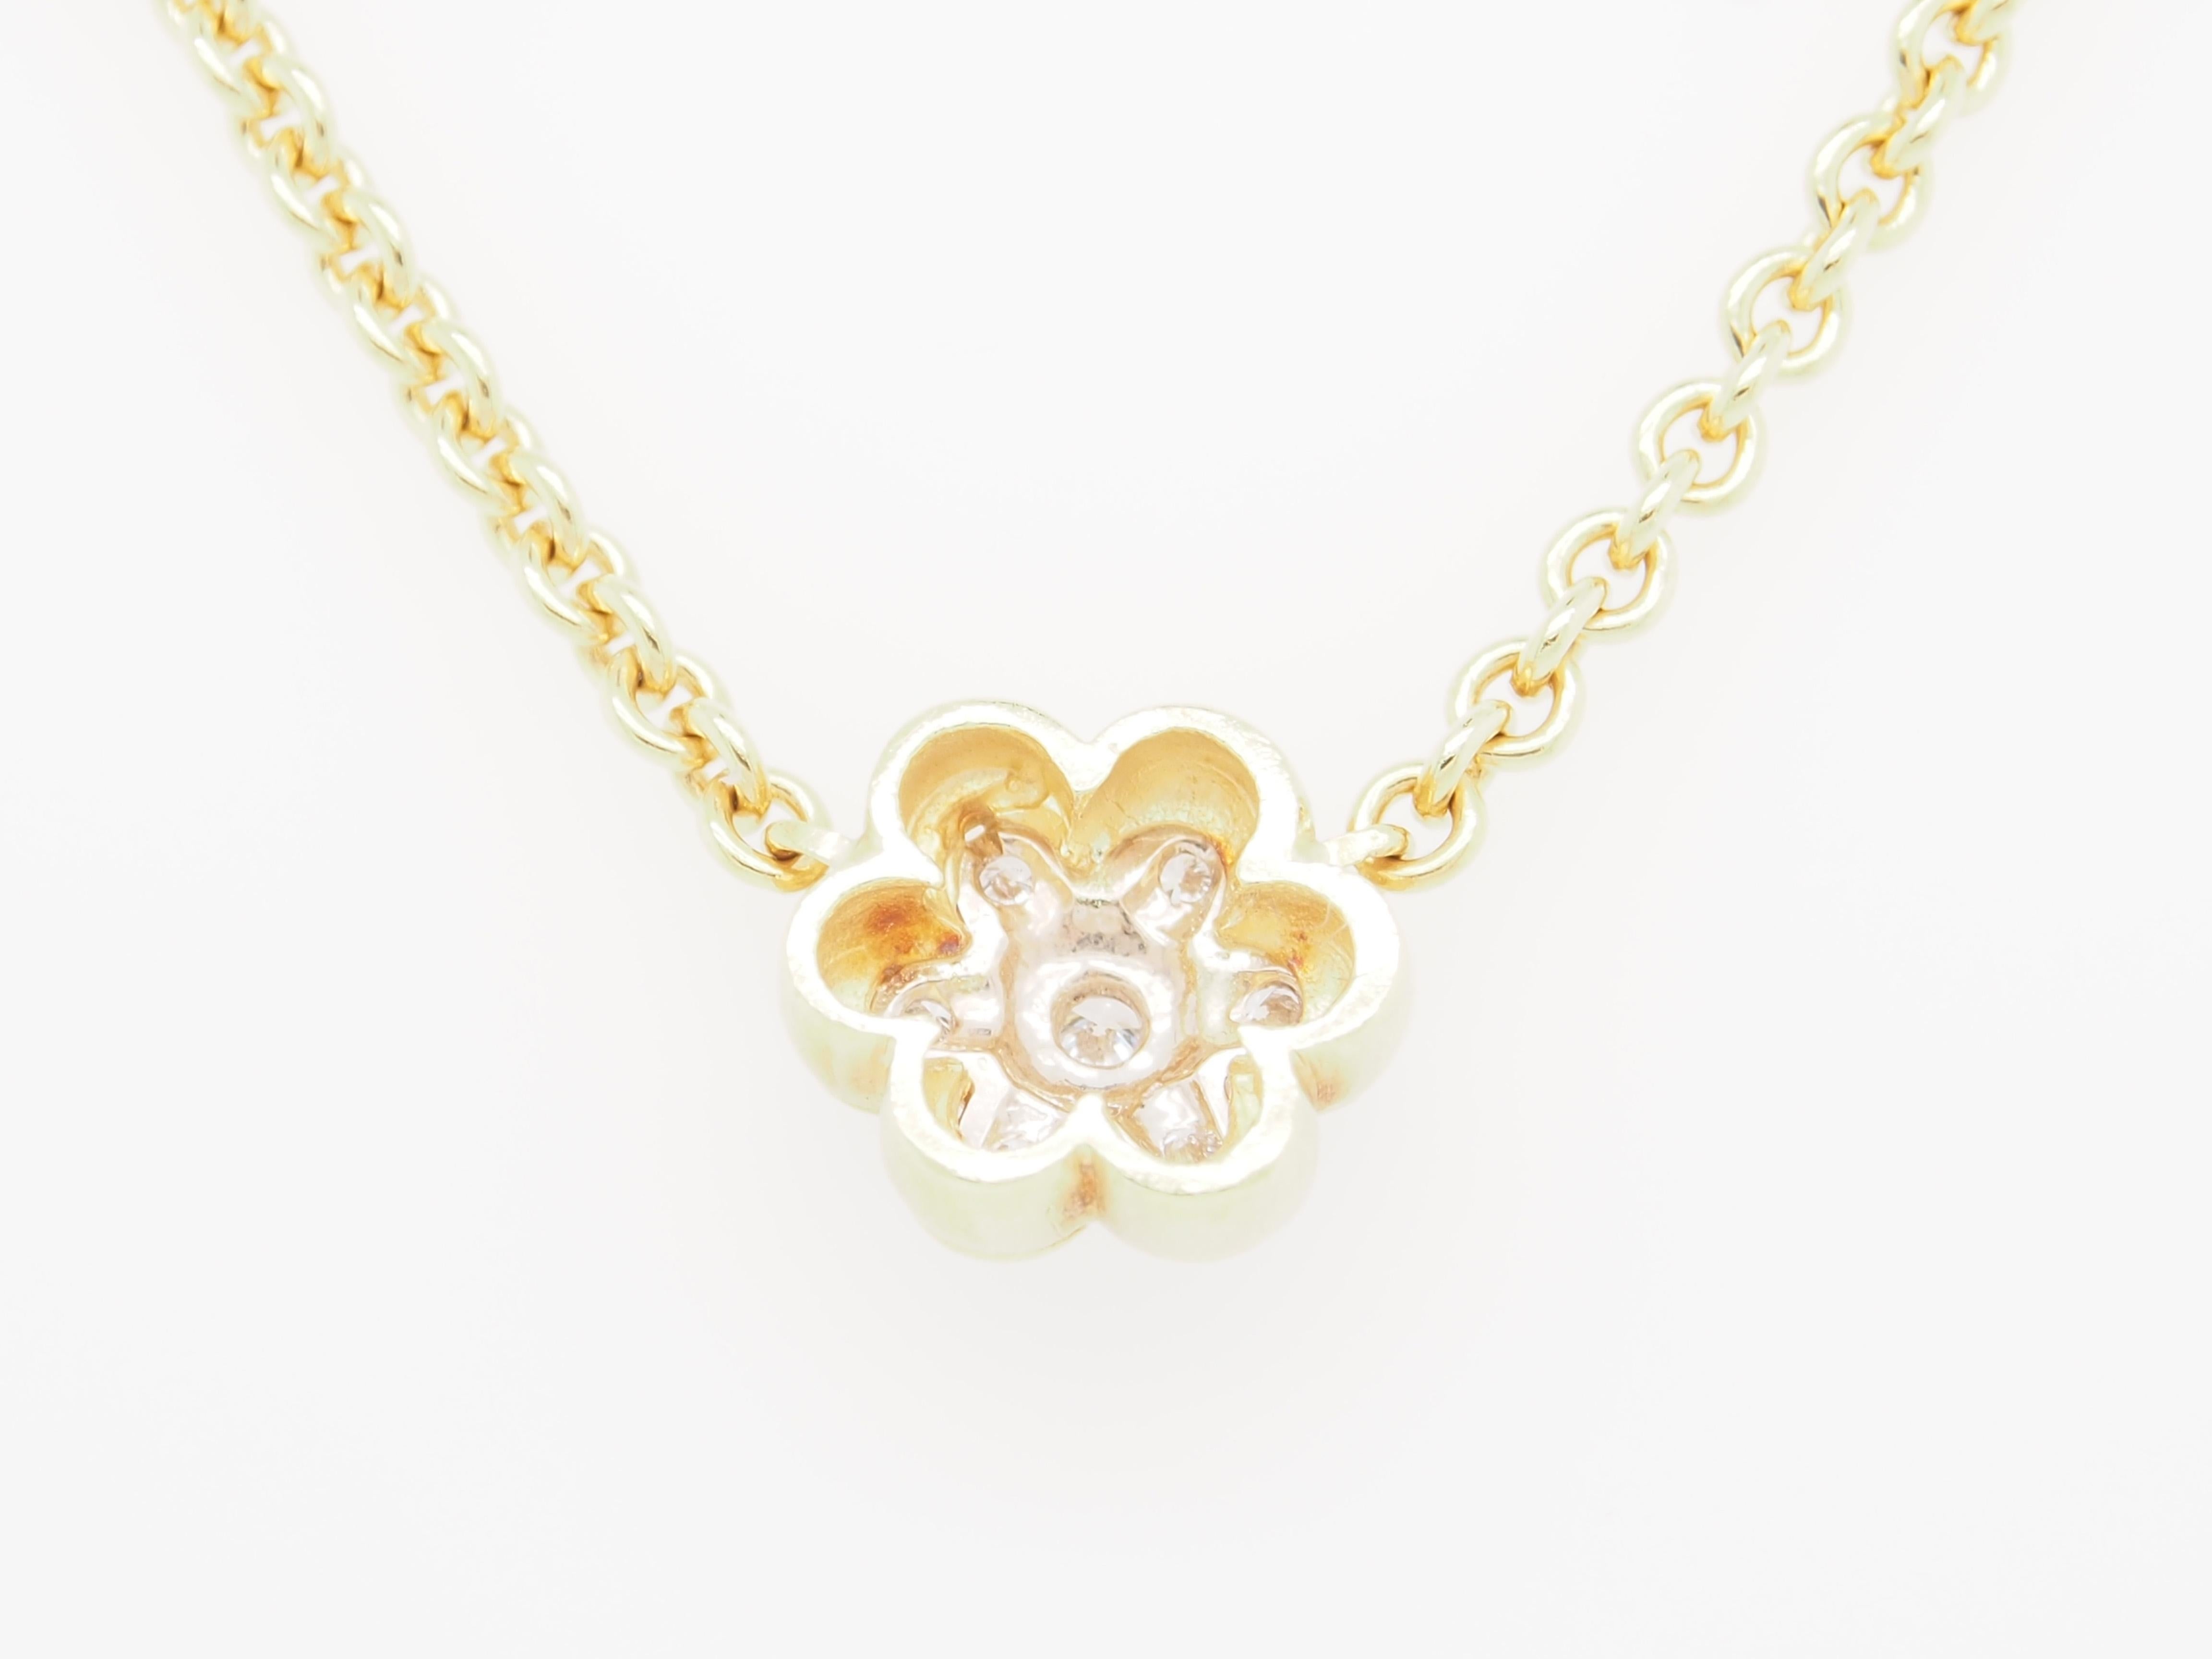 This is a delightful 18K Yellow Gold Necklace designed with (7) Round Brilliant Cut Diamond Cluster Flower, approximately 0.10ctw, G-H in Color, VS in Clarity. The Flower is 1/2 inch in diameter and is suspended from a stunning 16 inch Link Chain